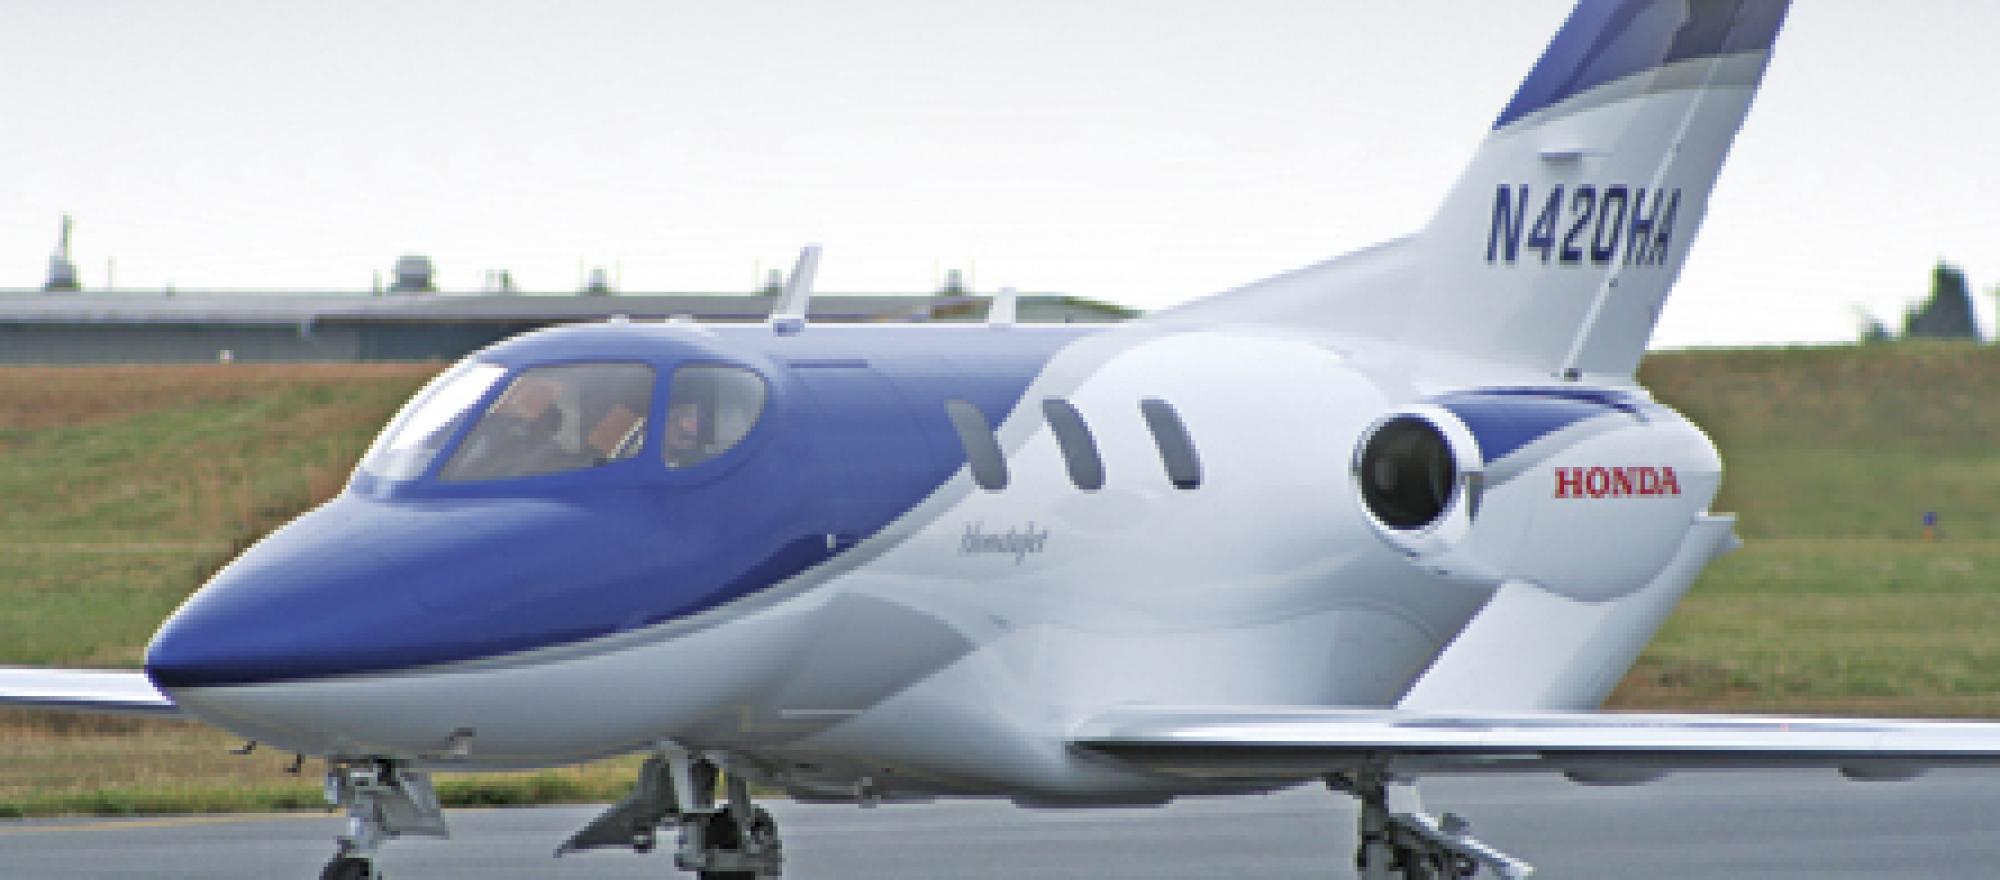 Honda chose to build, test fly and validate the HondaJet’s performance and ca